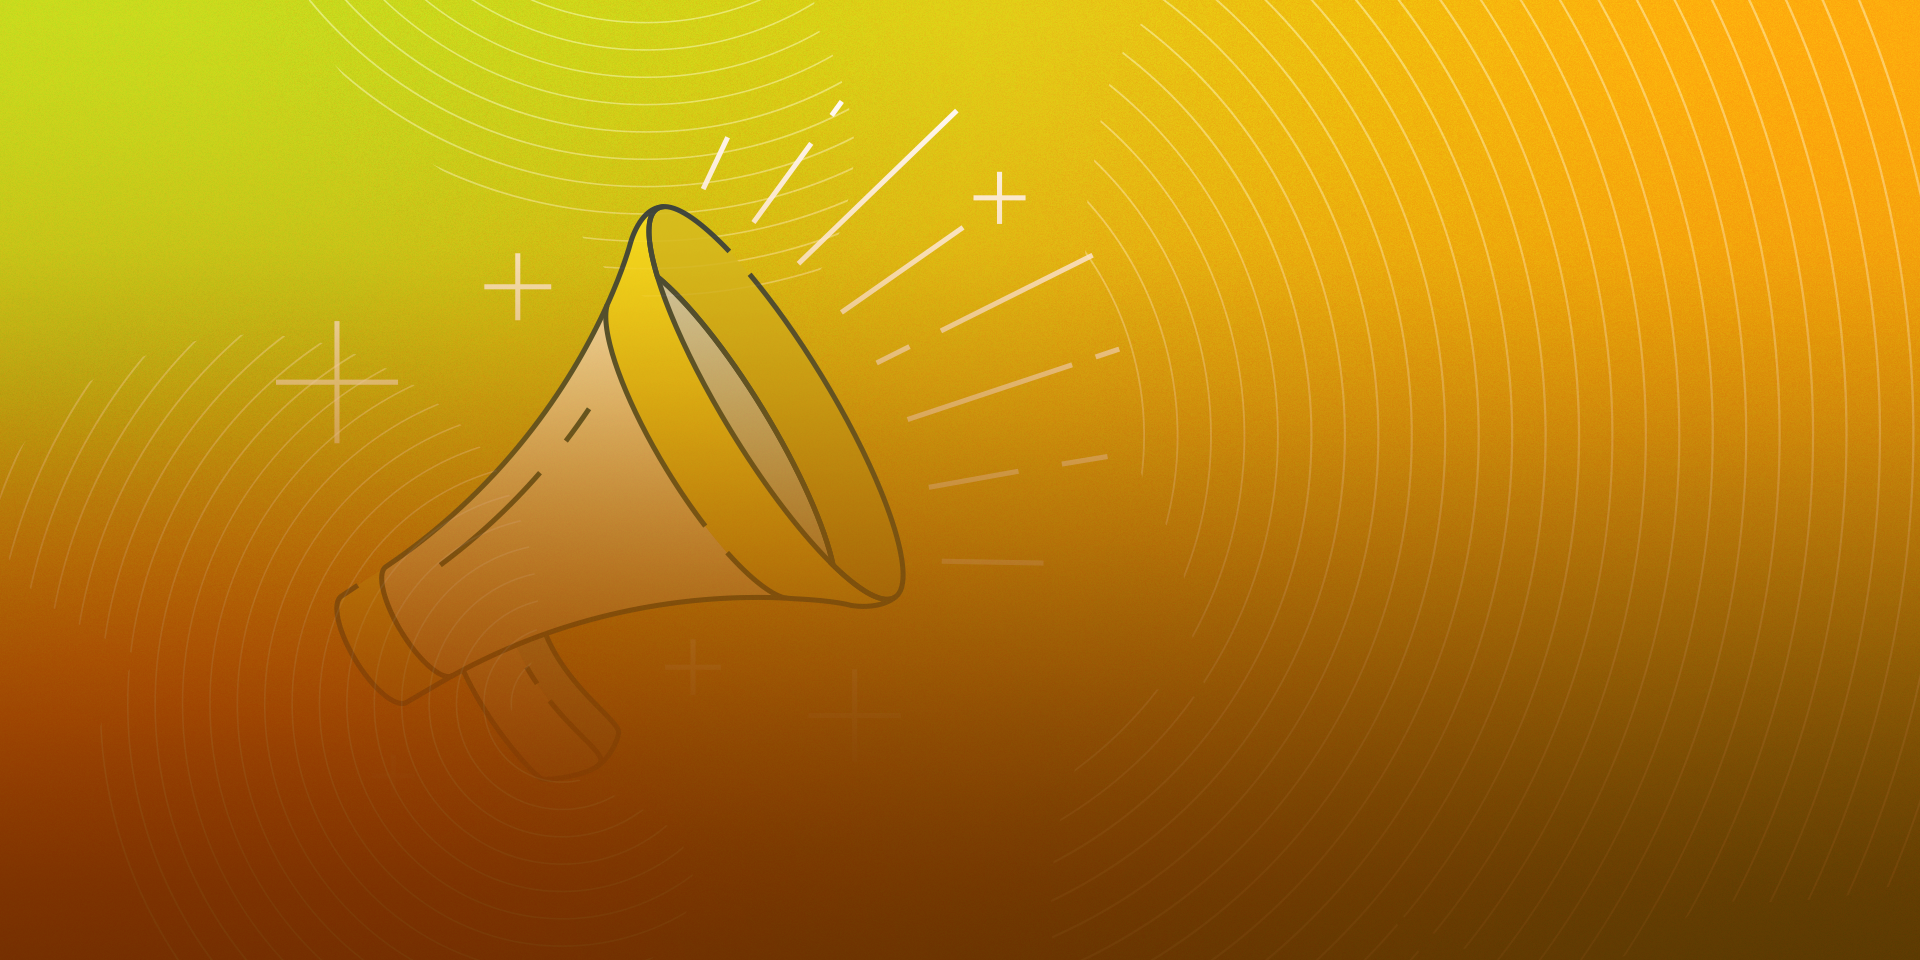 A graphic showing an illustration of a megaphone on an orange background.